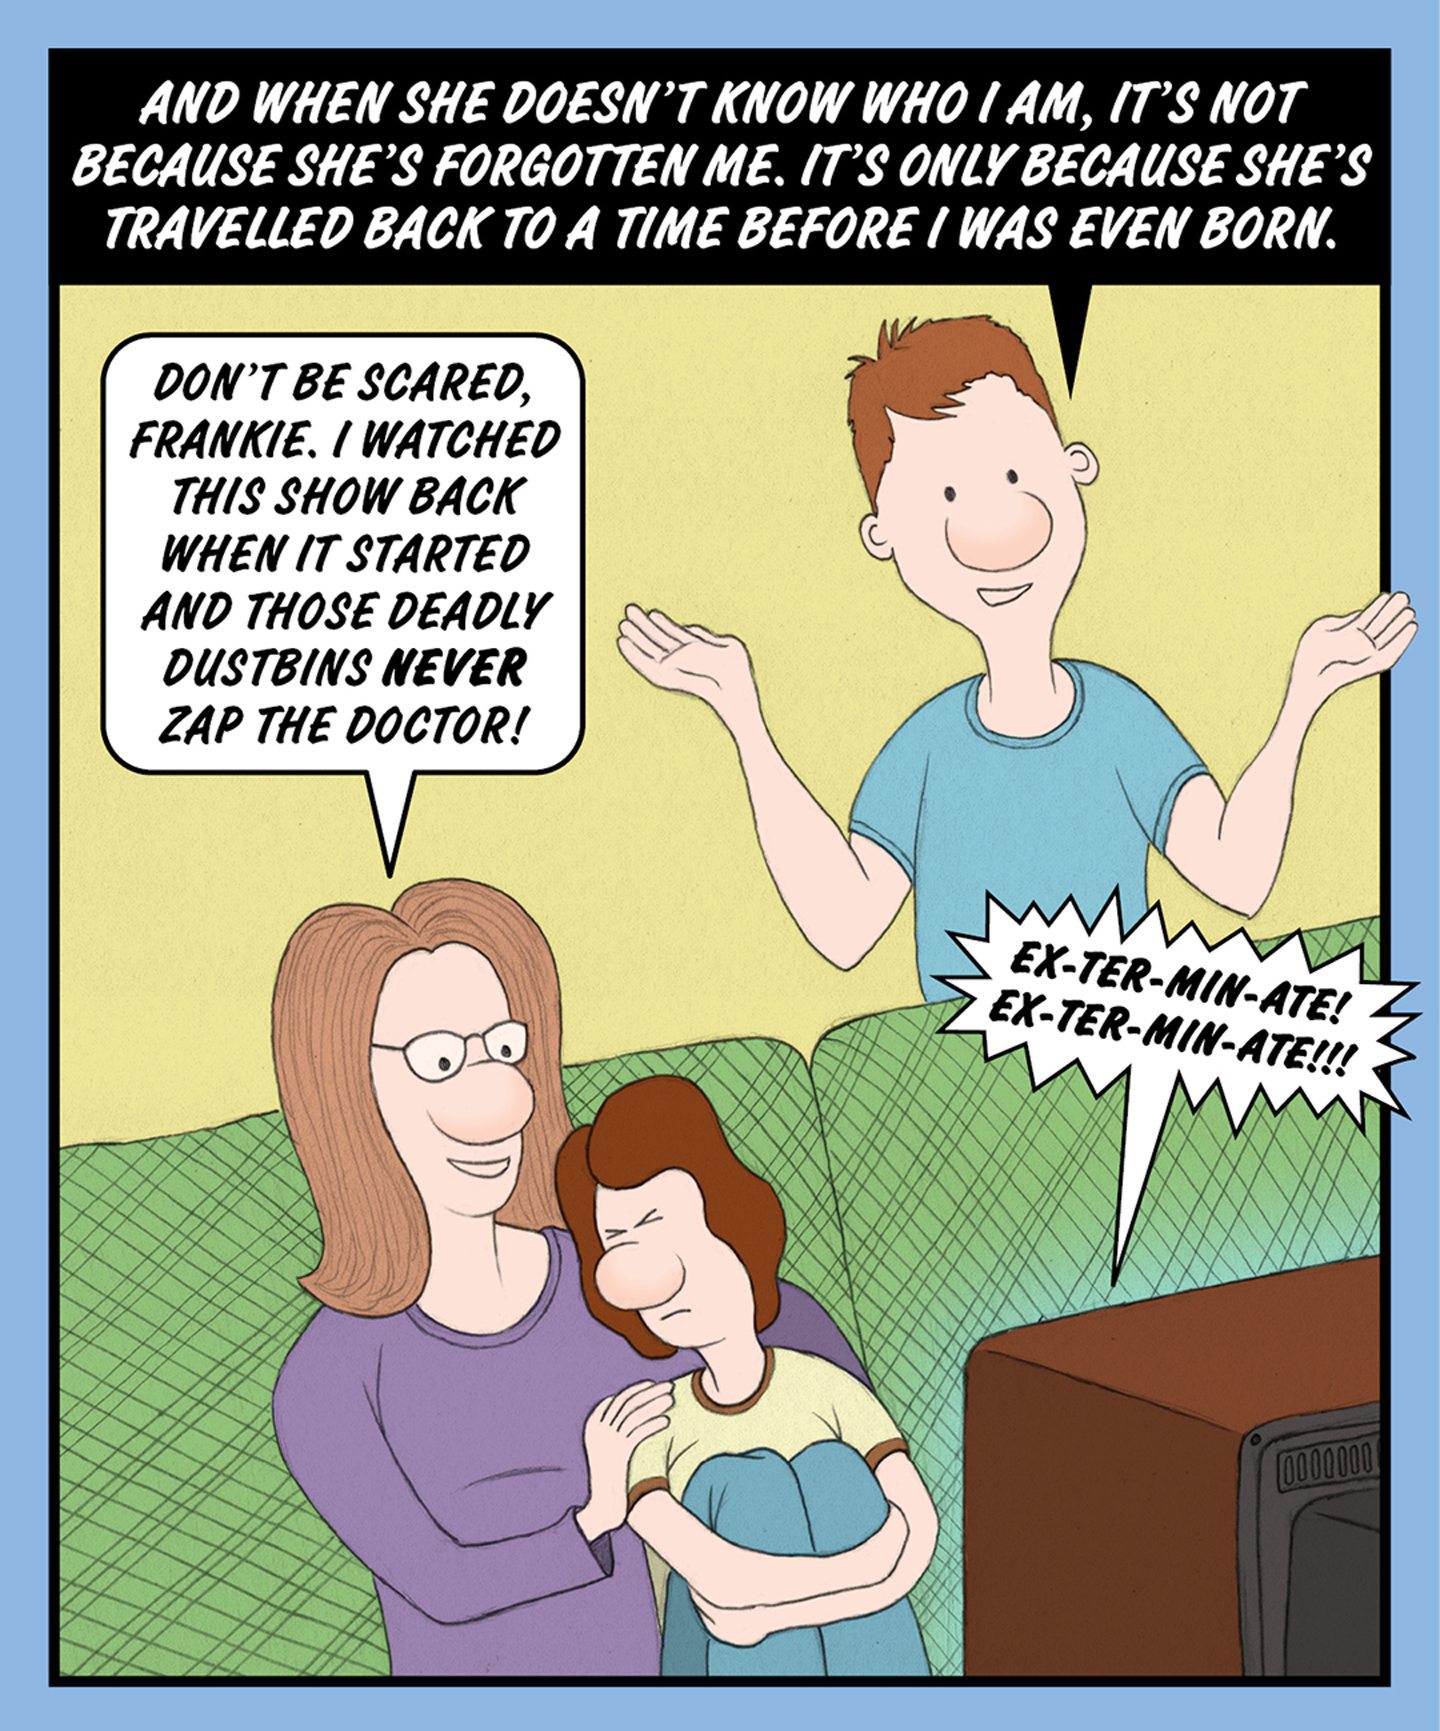 A comic illustration of a woman cuddling a young boy and another young boy standing behind the couch. The speech bubble from the woman reads: DON'T BE SCARED, FRANKIE. I WATCHED THIS SHOW BACK WHEN IT STARTED AND THOSE DEADLY DUSTBINS NEVER ZAP THE DOCTOR! The text above the image reads: AND WHEN SHE DOESN'T KNOW WHO I AM, IT'S NOT BECAUSE SHE'S FORGOTTEN ME. IT'S ONLY BECAUSE SHE'S TRAVELLED BACK TO A TIME BEFORE I WAS EVEN BORN. 